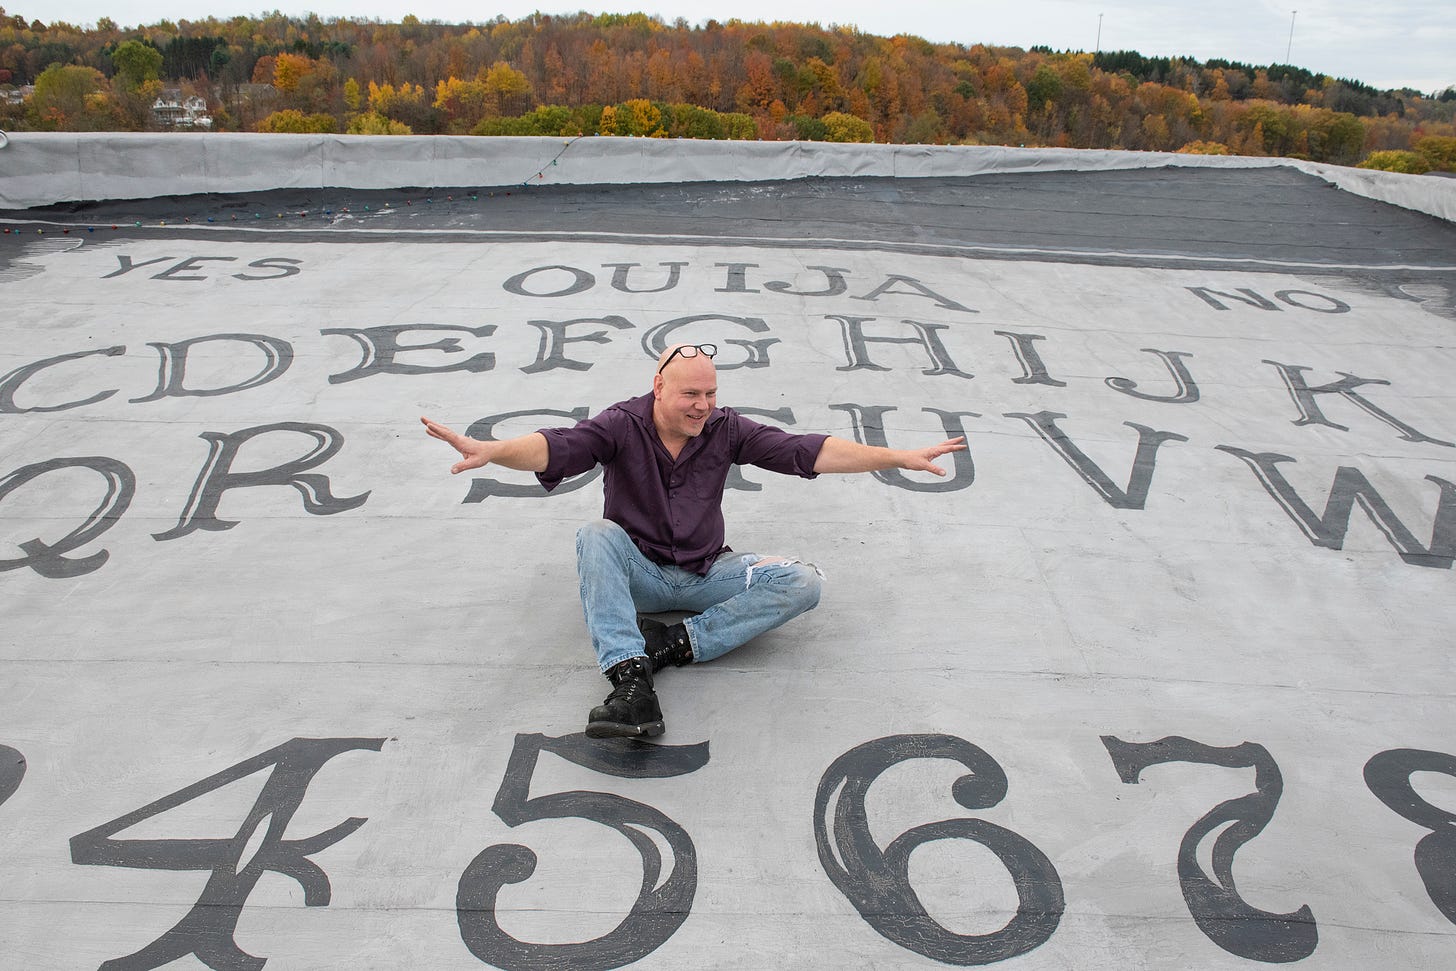 Is the world's biggest Ouija board in Western Pa. or Massachusetts? Yes.  No. Goodbye.